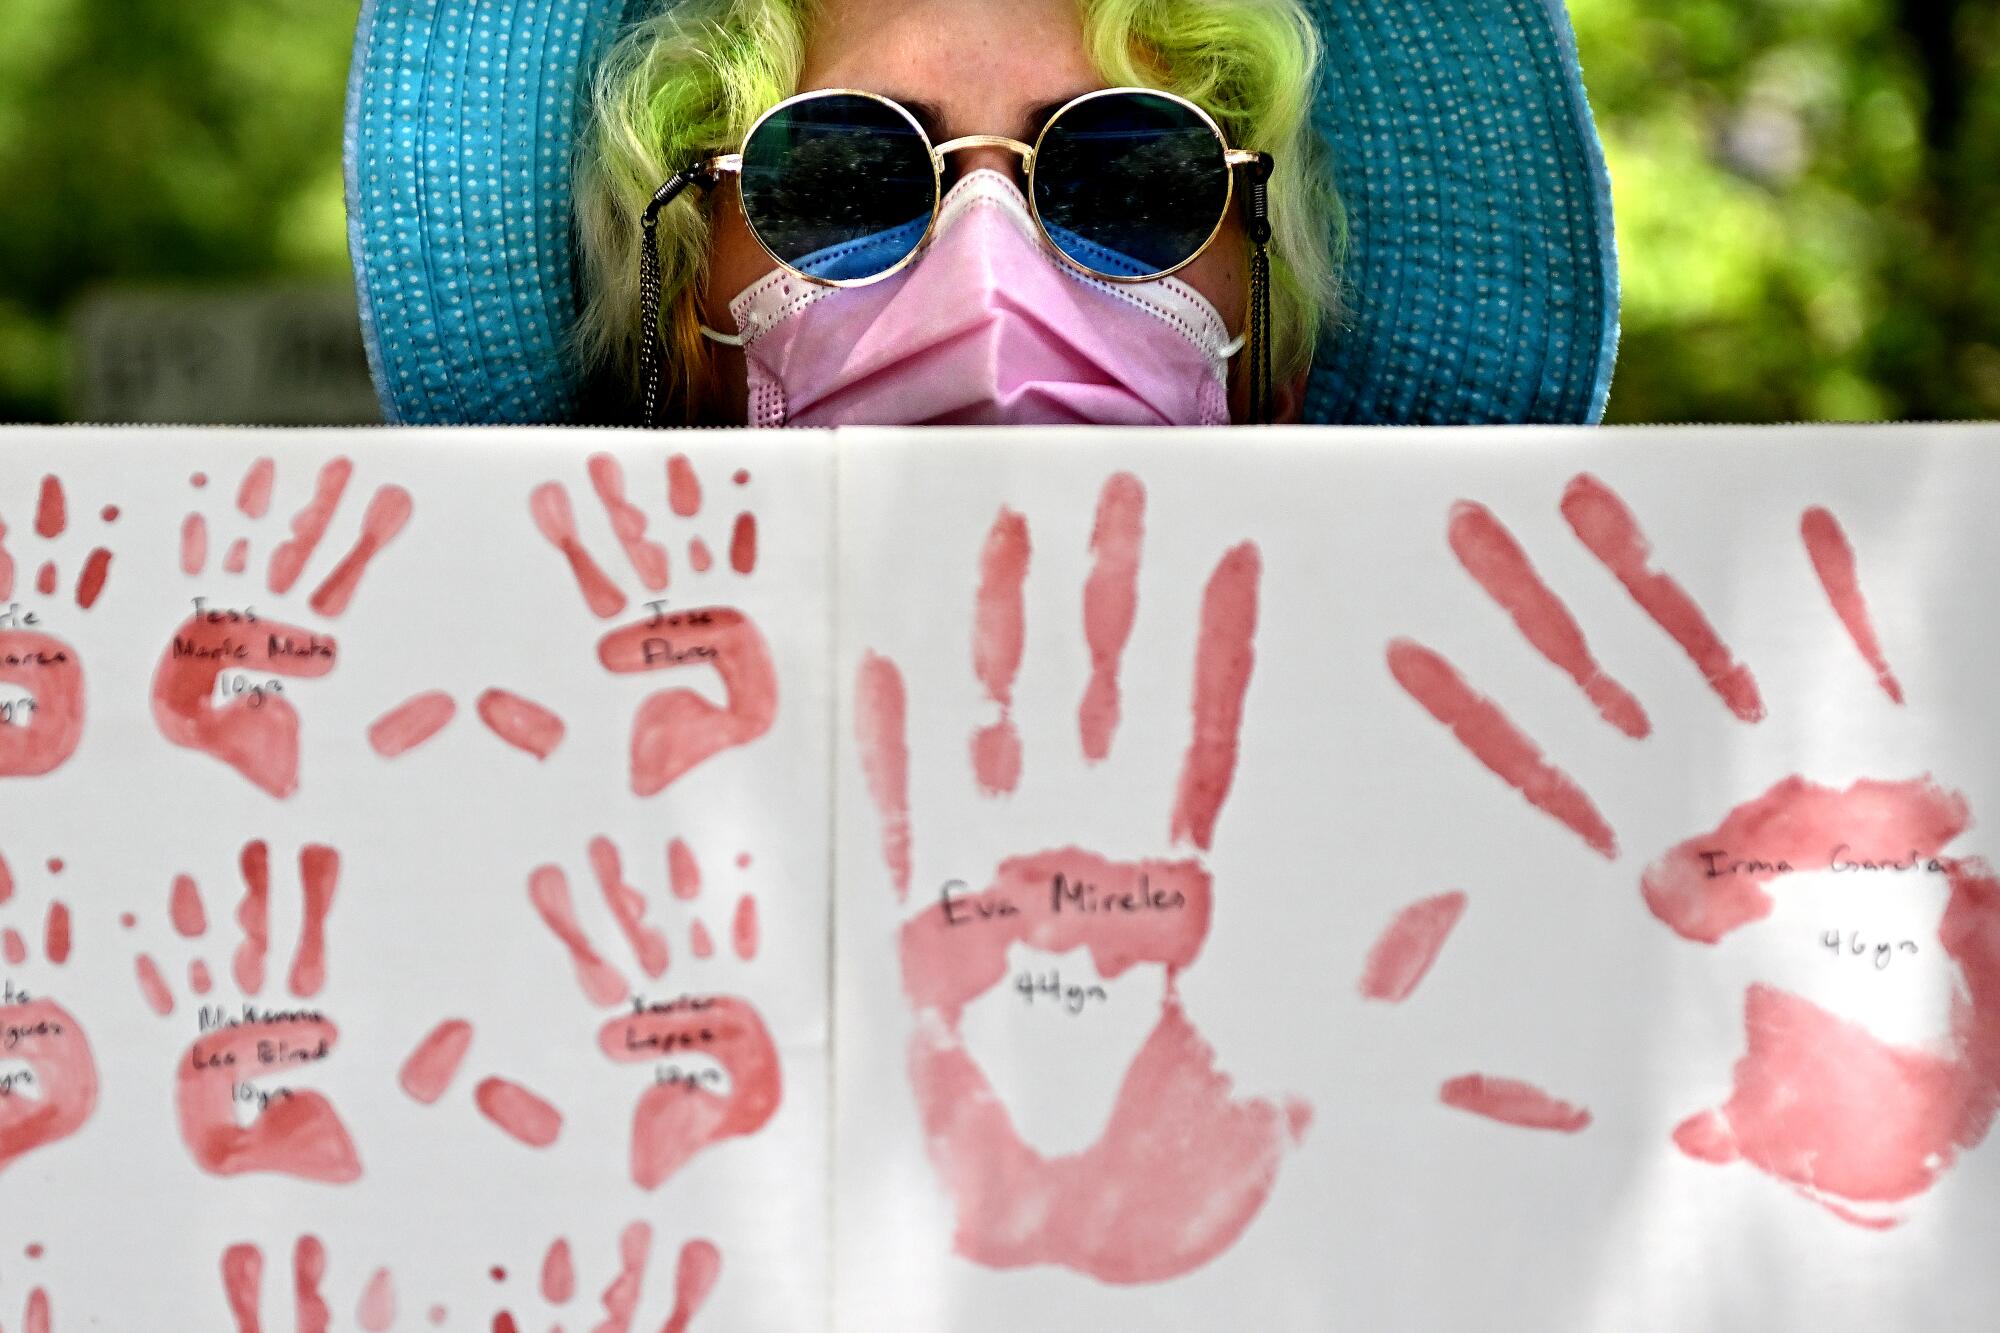 A person wearing a hat and sunglasses holds a posters with red handprints